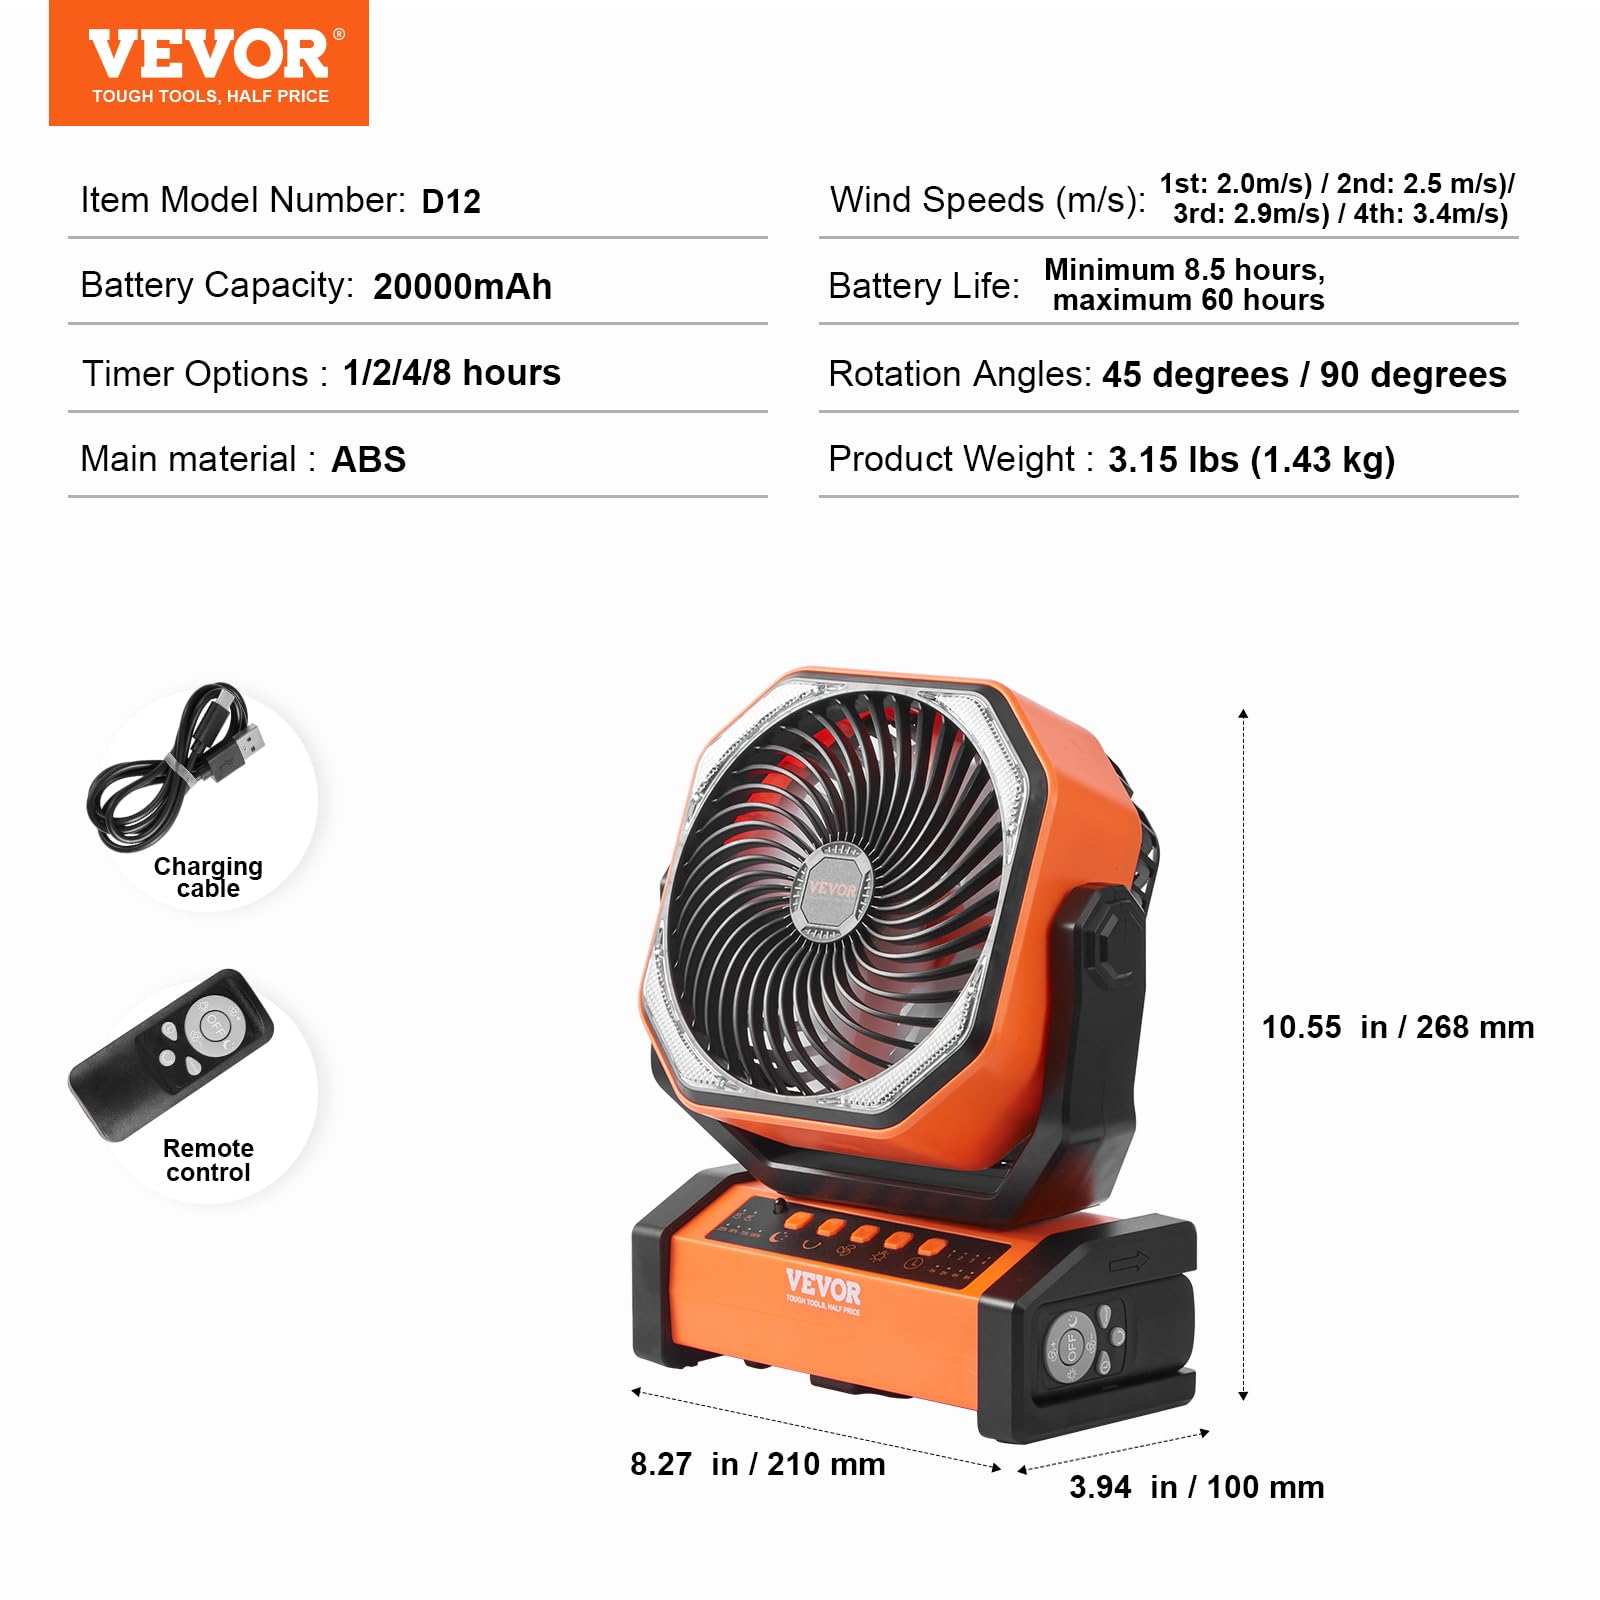 VEVOR 20,000mAh Camping Fan, 9 Inch Battery Operated Fan, Rechargeable Fan Portable with 4 Speeds, Auto Oscillating & Timer, Outdoor Tent Fan with Remote & Hook for Picnic, Barbecue, Fishing, Travel